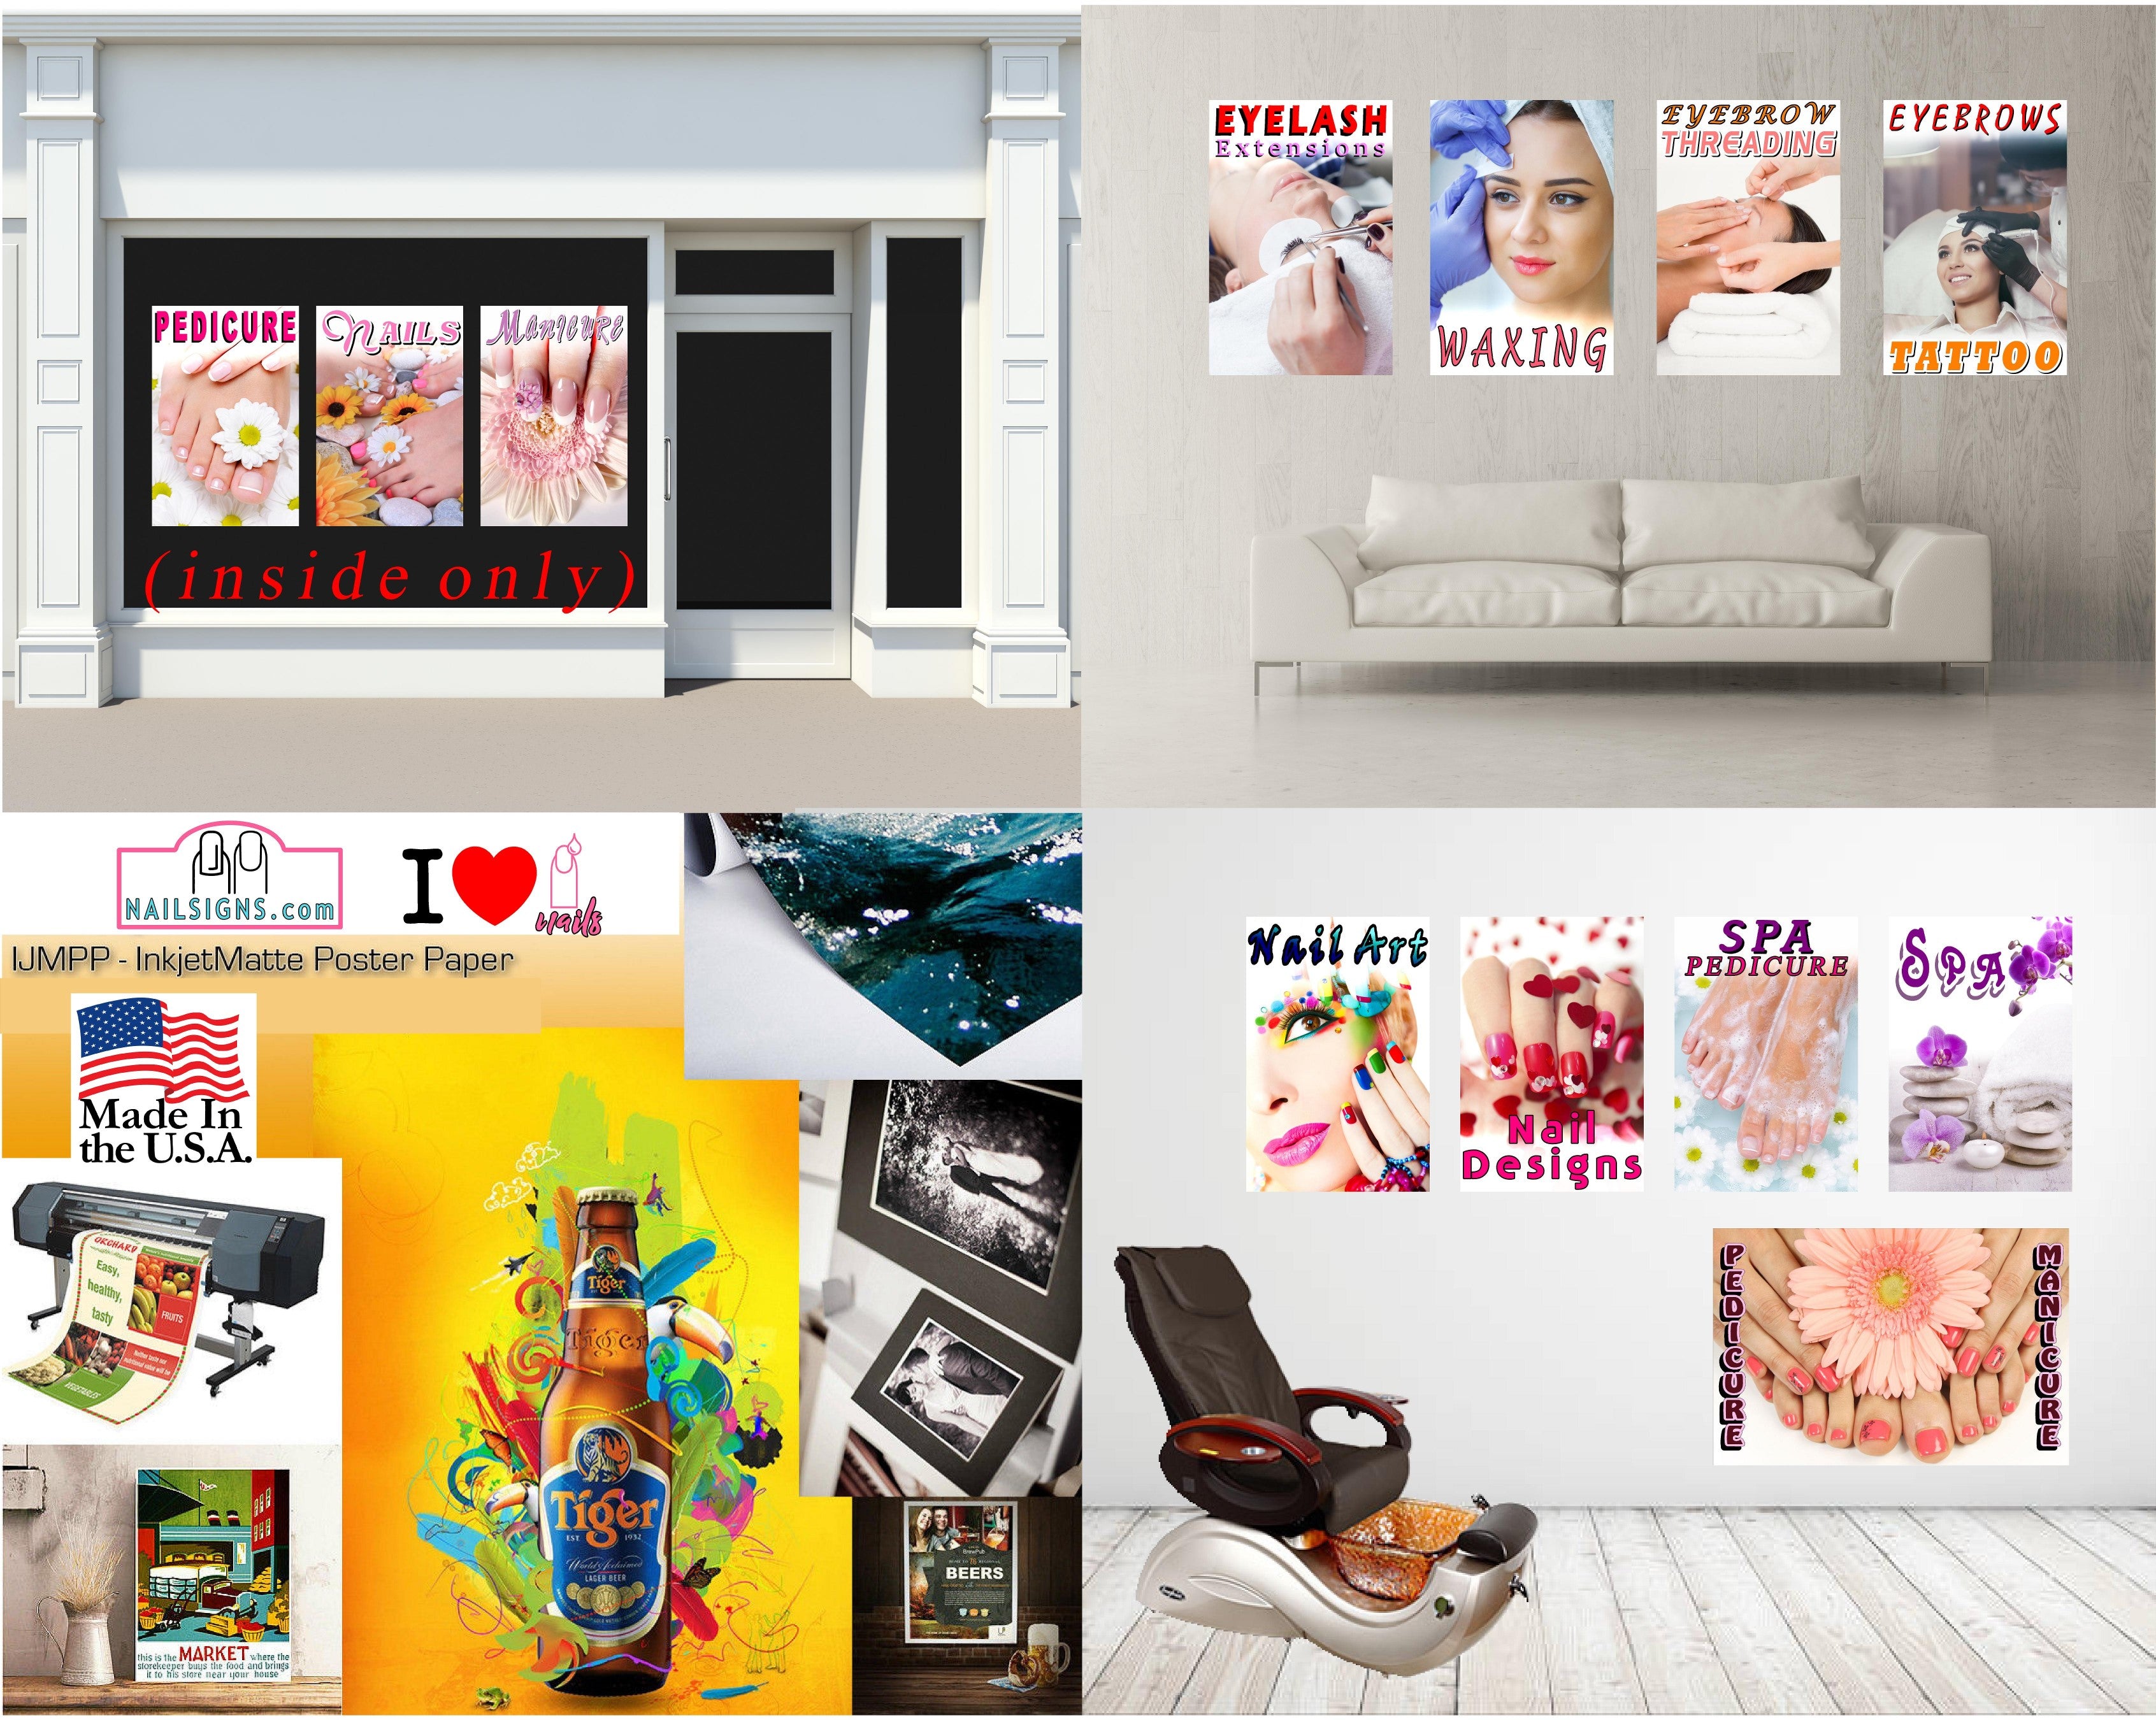 Skin Care 03 Photo-Realistic Paper Poster Premium Interior Inside Sign Advertising Wall Window Non-Laminated Vertical